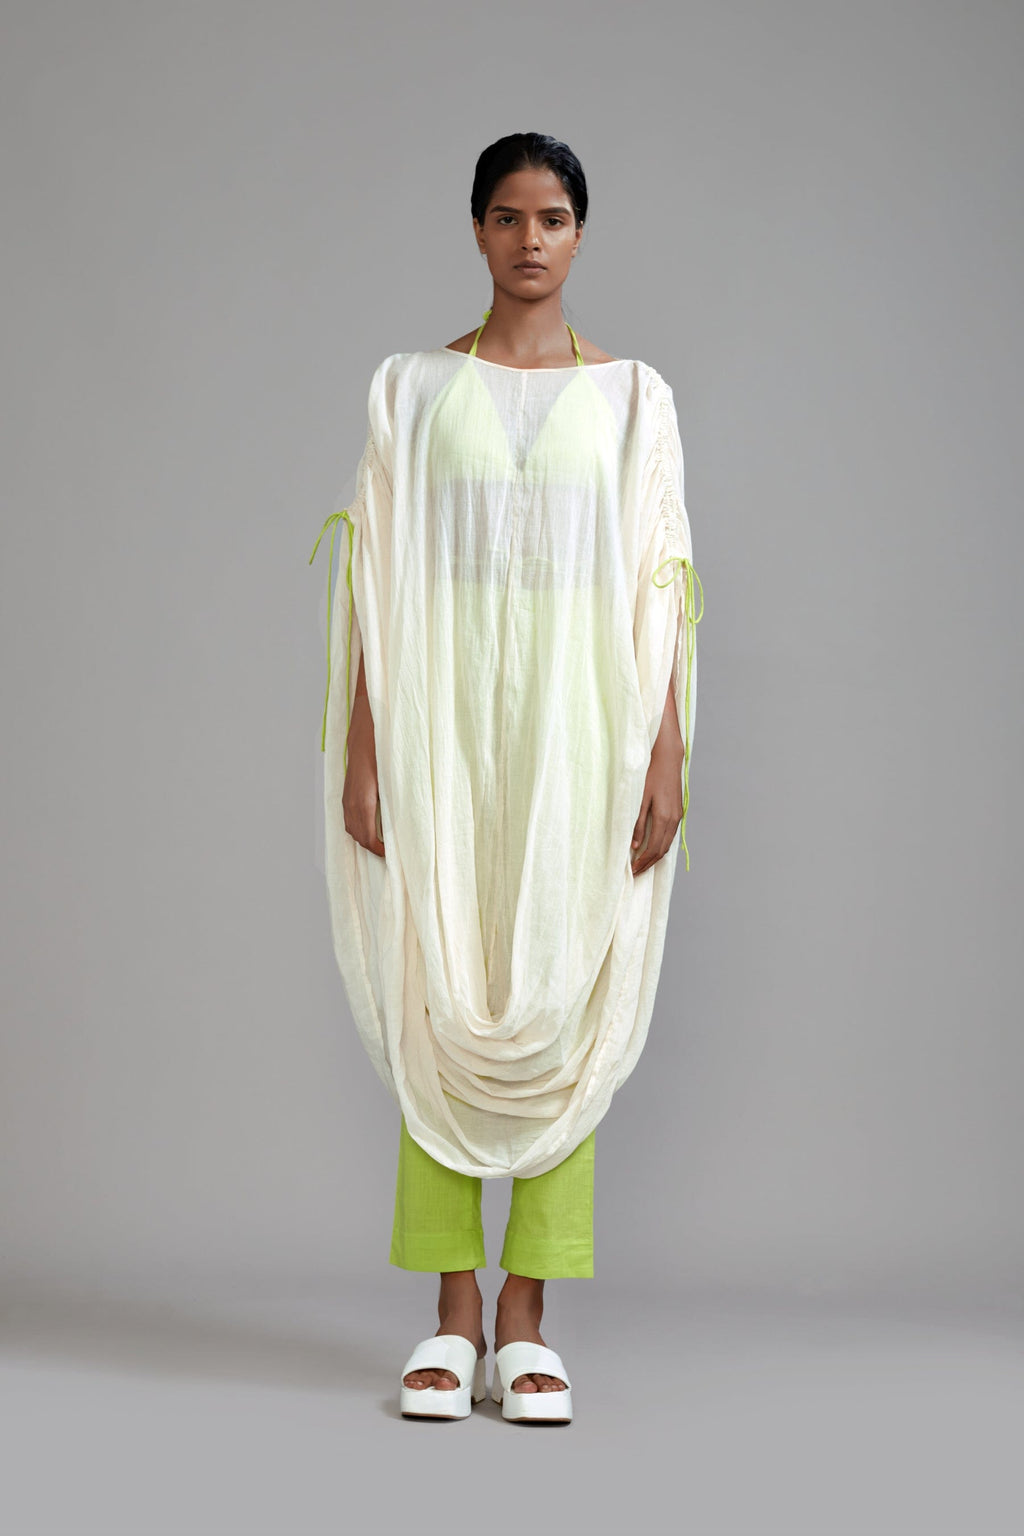 Mati Separates XS Off-White with Neon Green Gathered Cowl Tunic